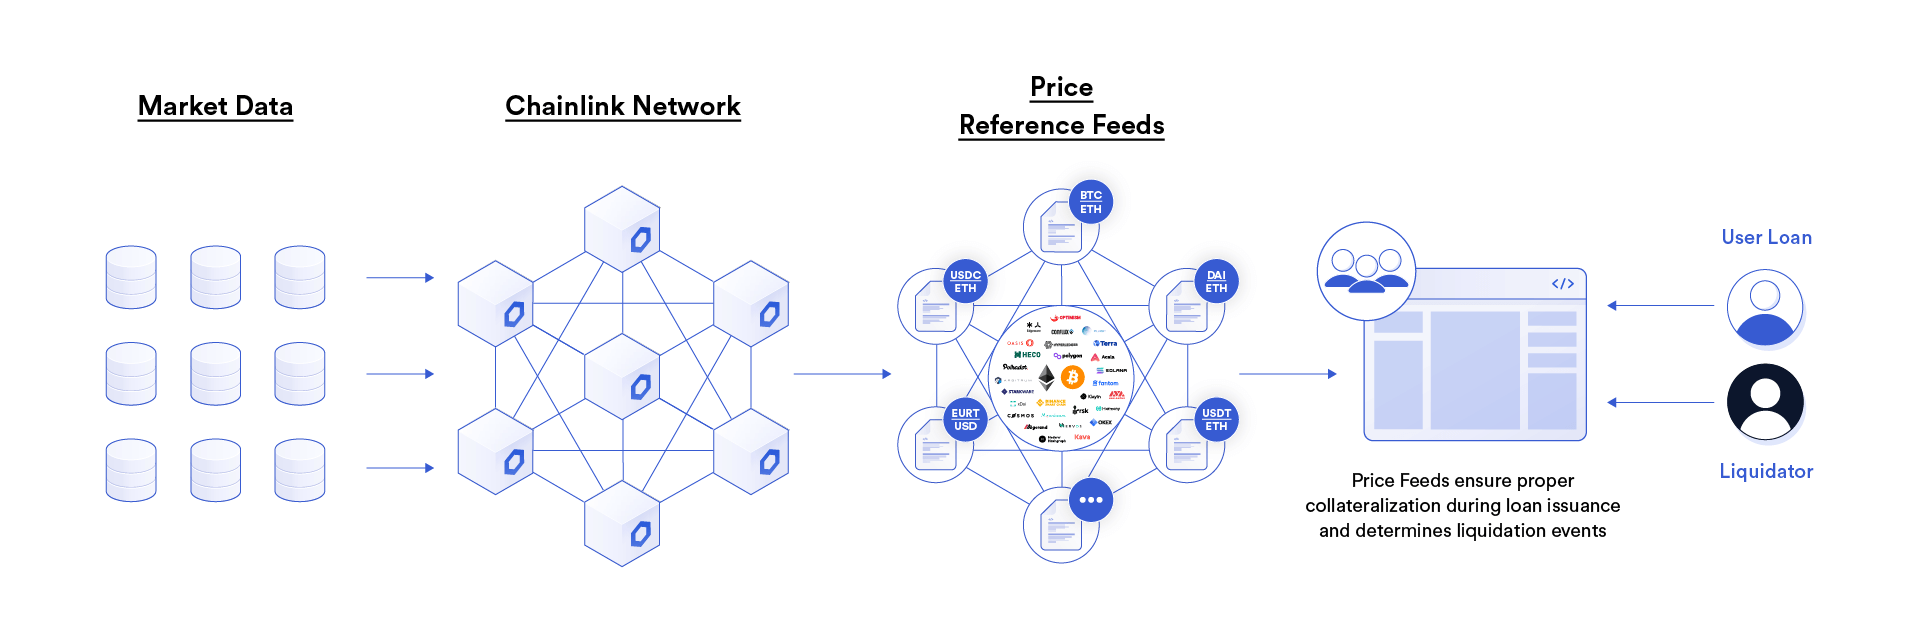 Chainlink Price Feeds for DeFi